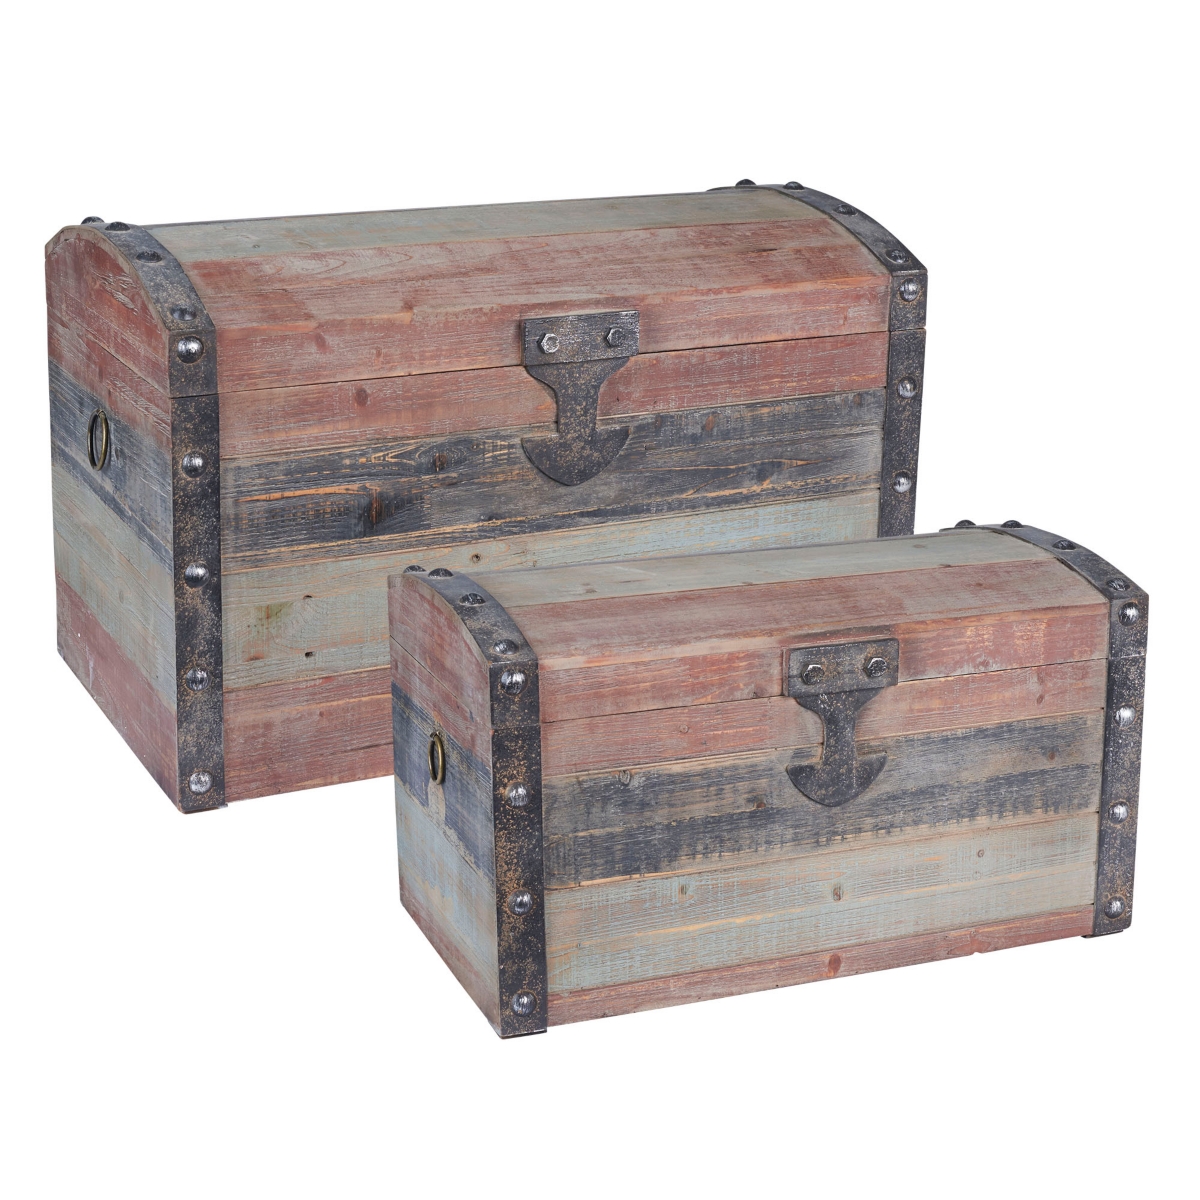 Household Essentials Set Of 2 Weathered Wooden Storage Trunks In Weathered Red,black,blue